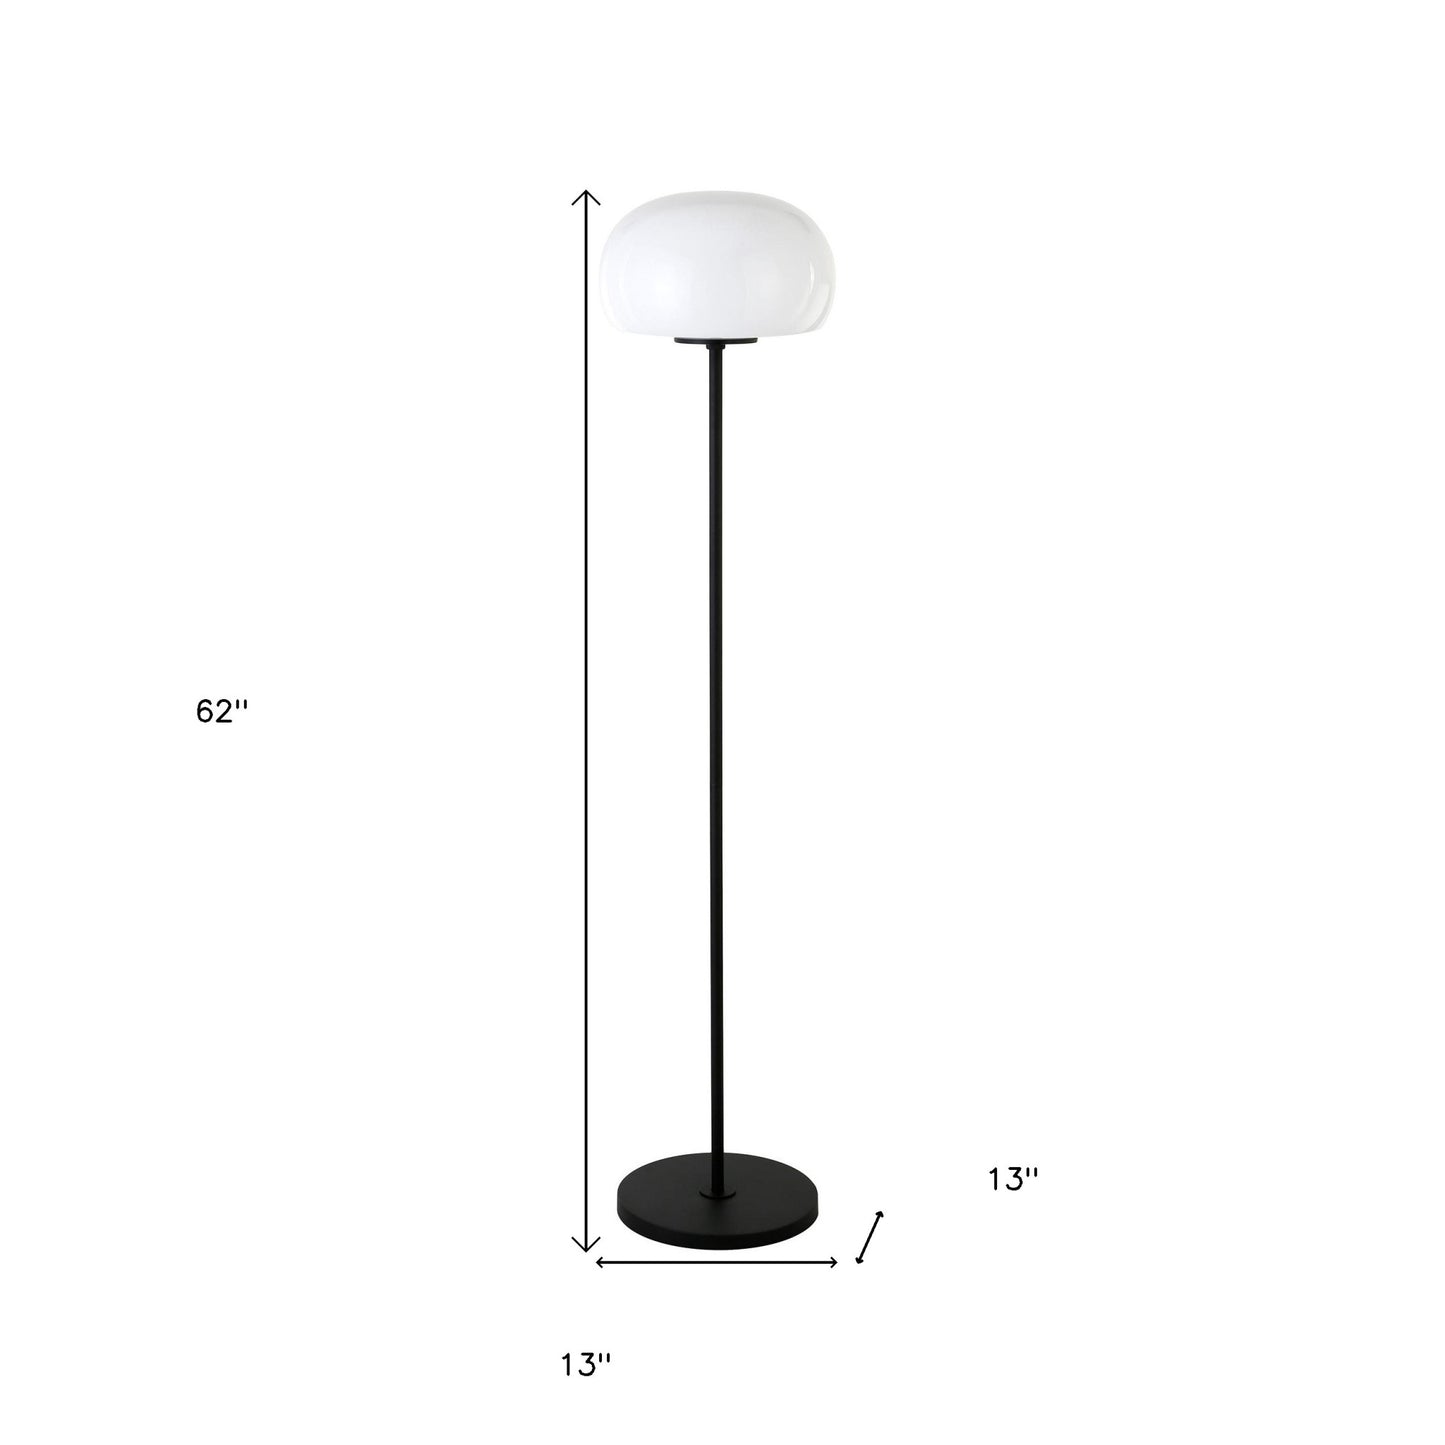 62" Black Novelty Floor Lamp With White Frosted Glass Globe Shade